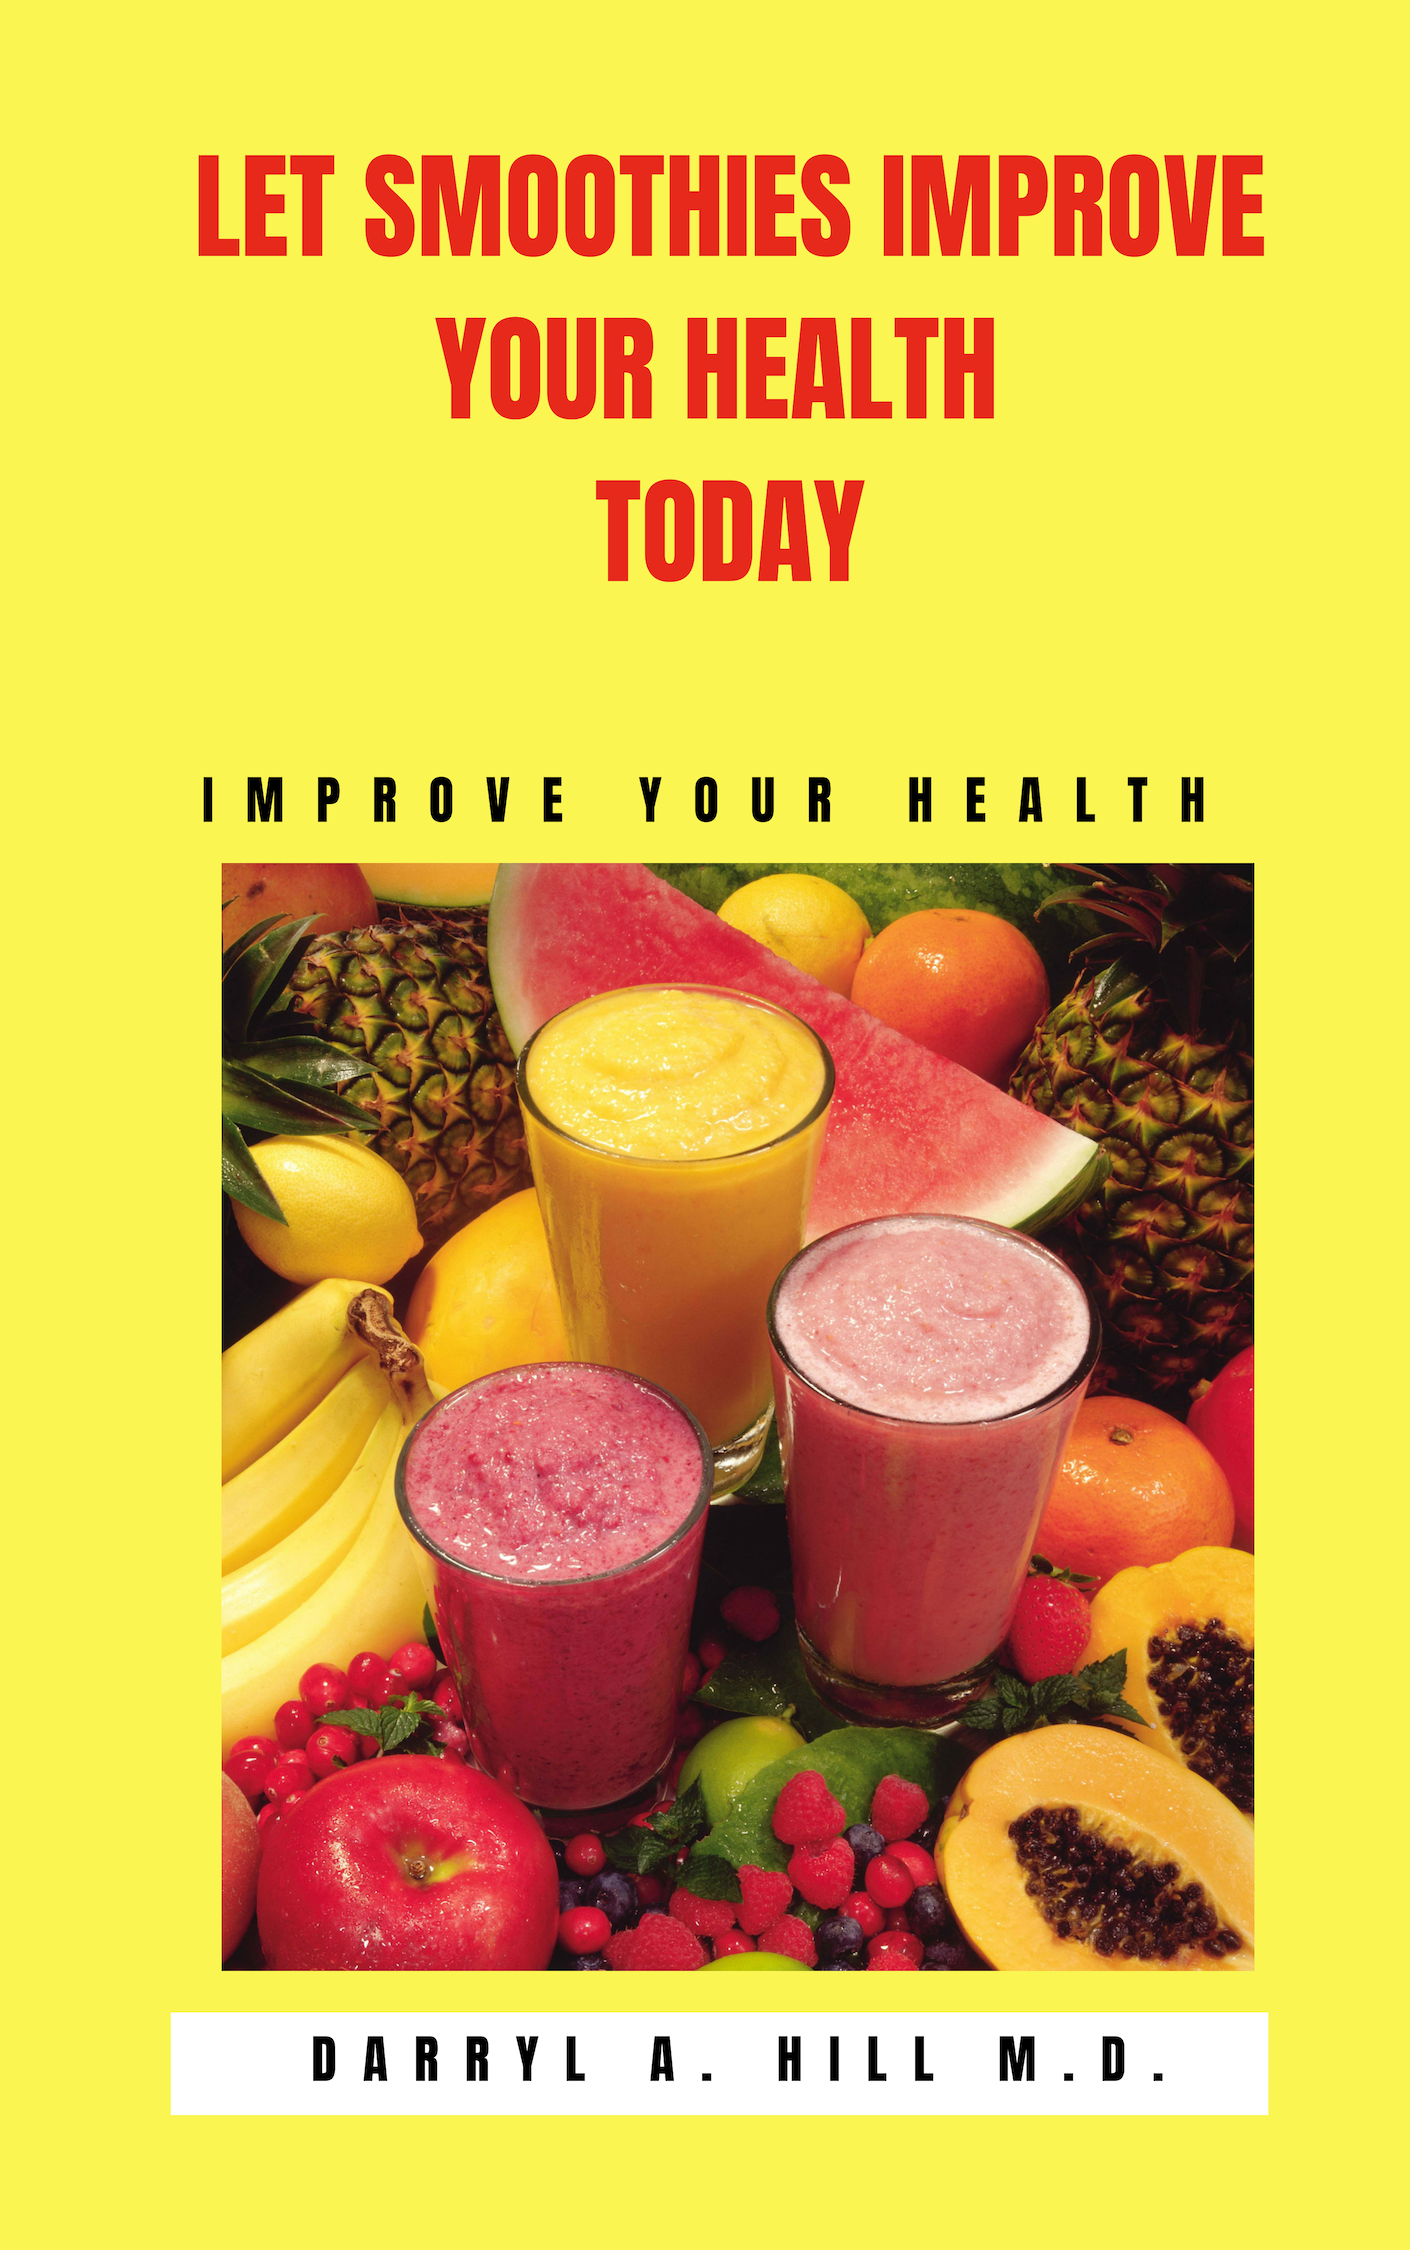 Let Smoothies Improve Your Health